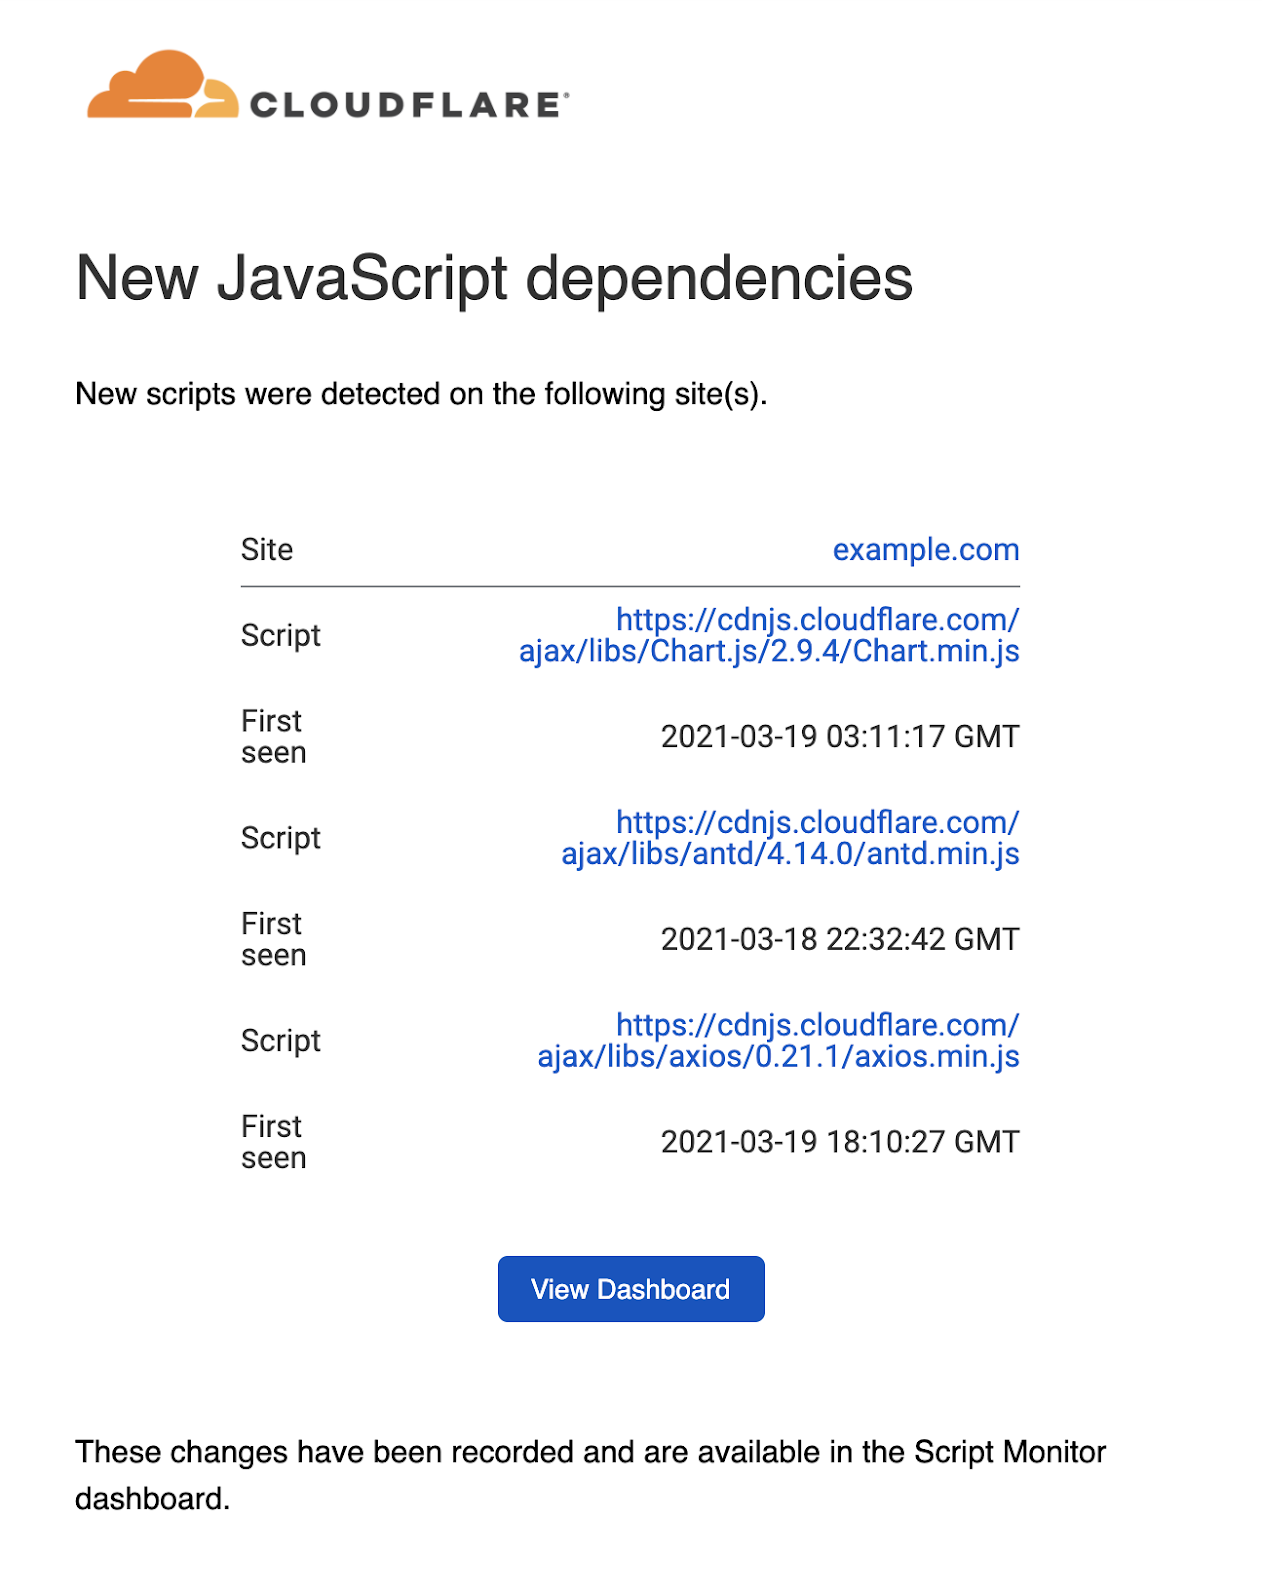 Email notification example for new JavaScript dependencies found